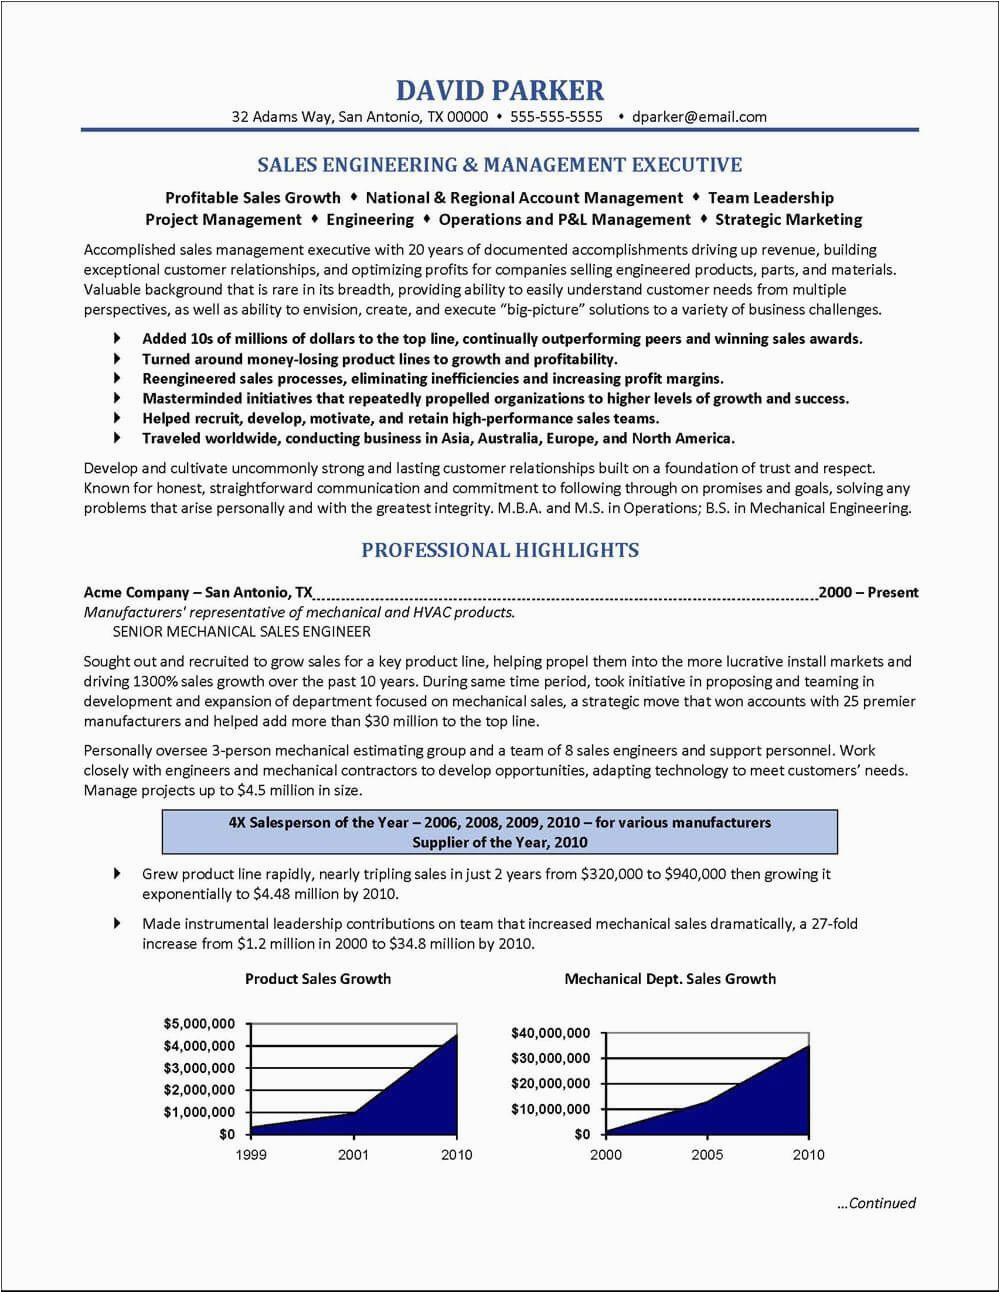 Sales and Service Engineer Resume Sample This Sample Sales Engineer Resume Was Professionally